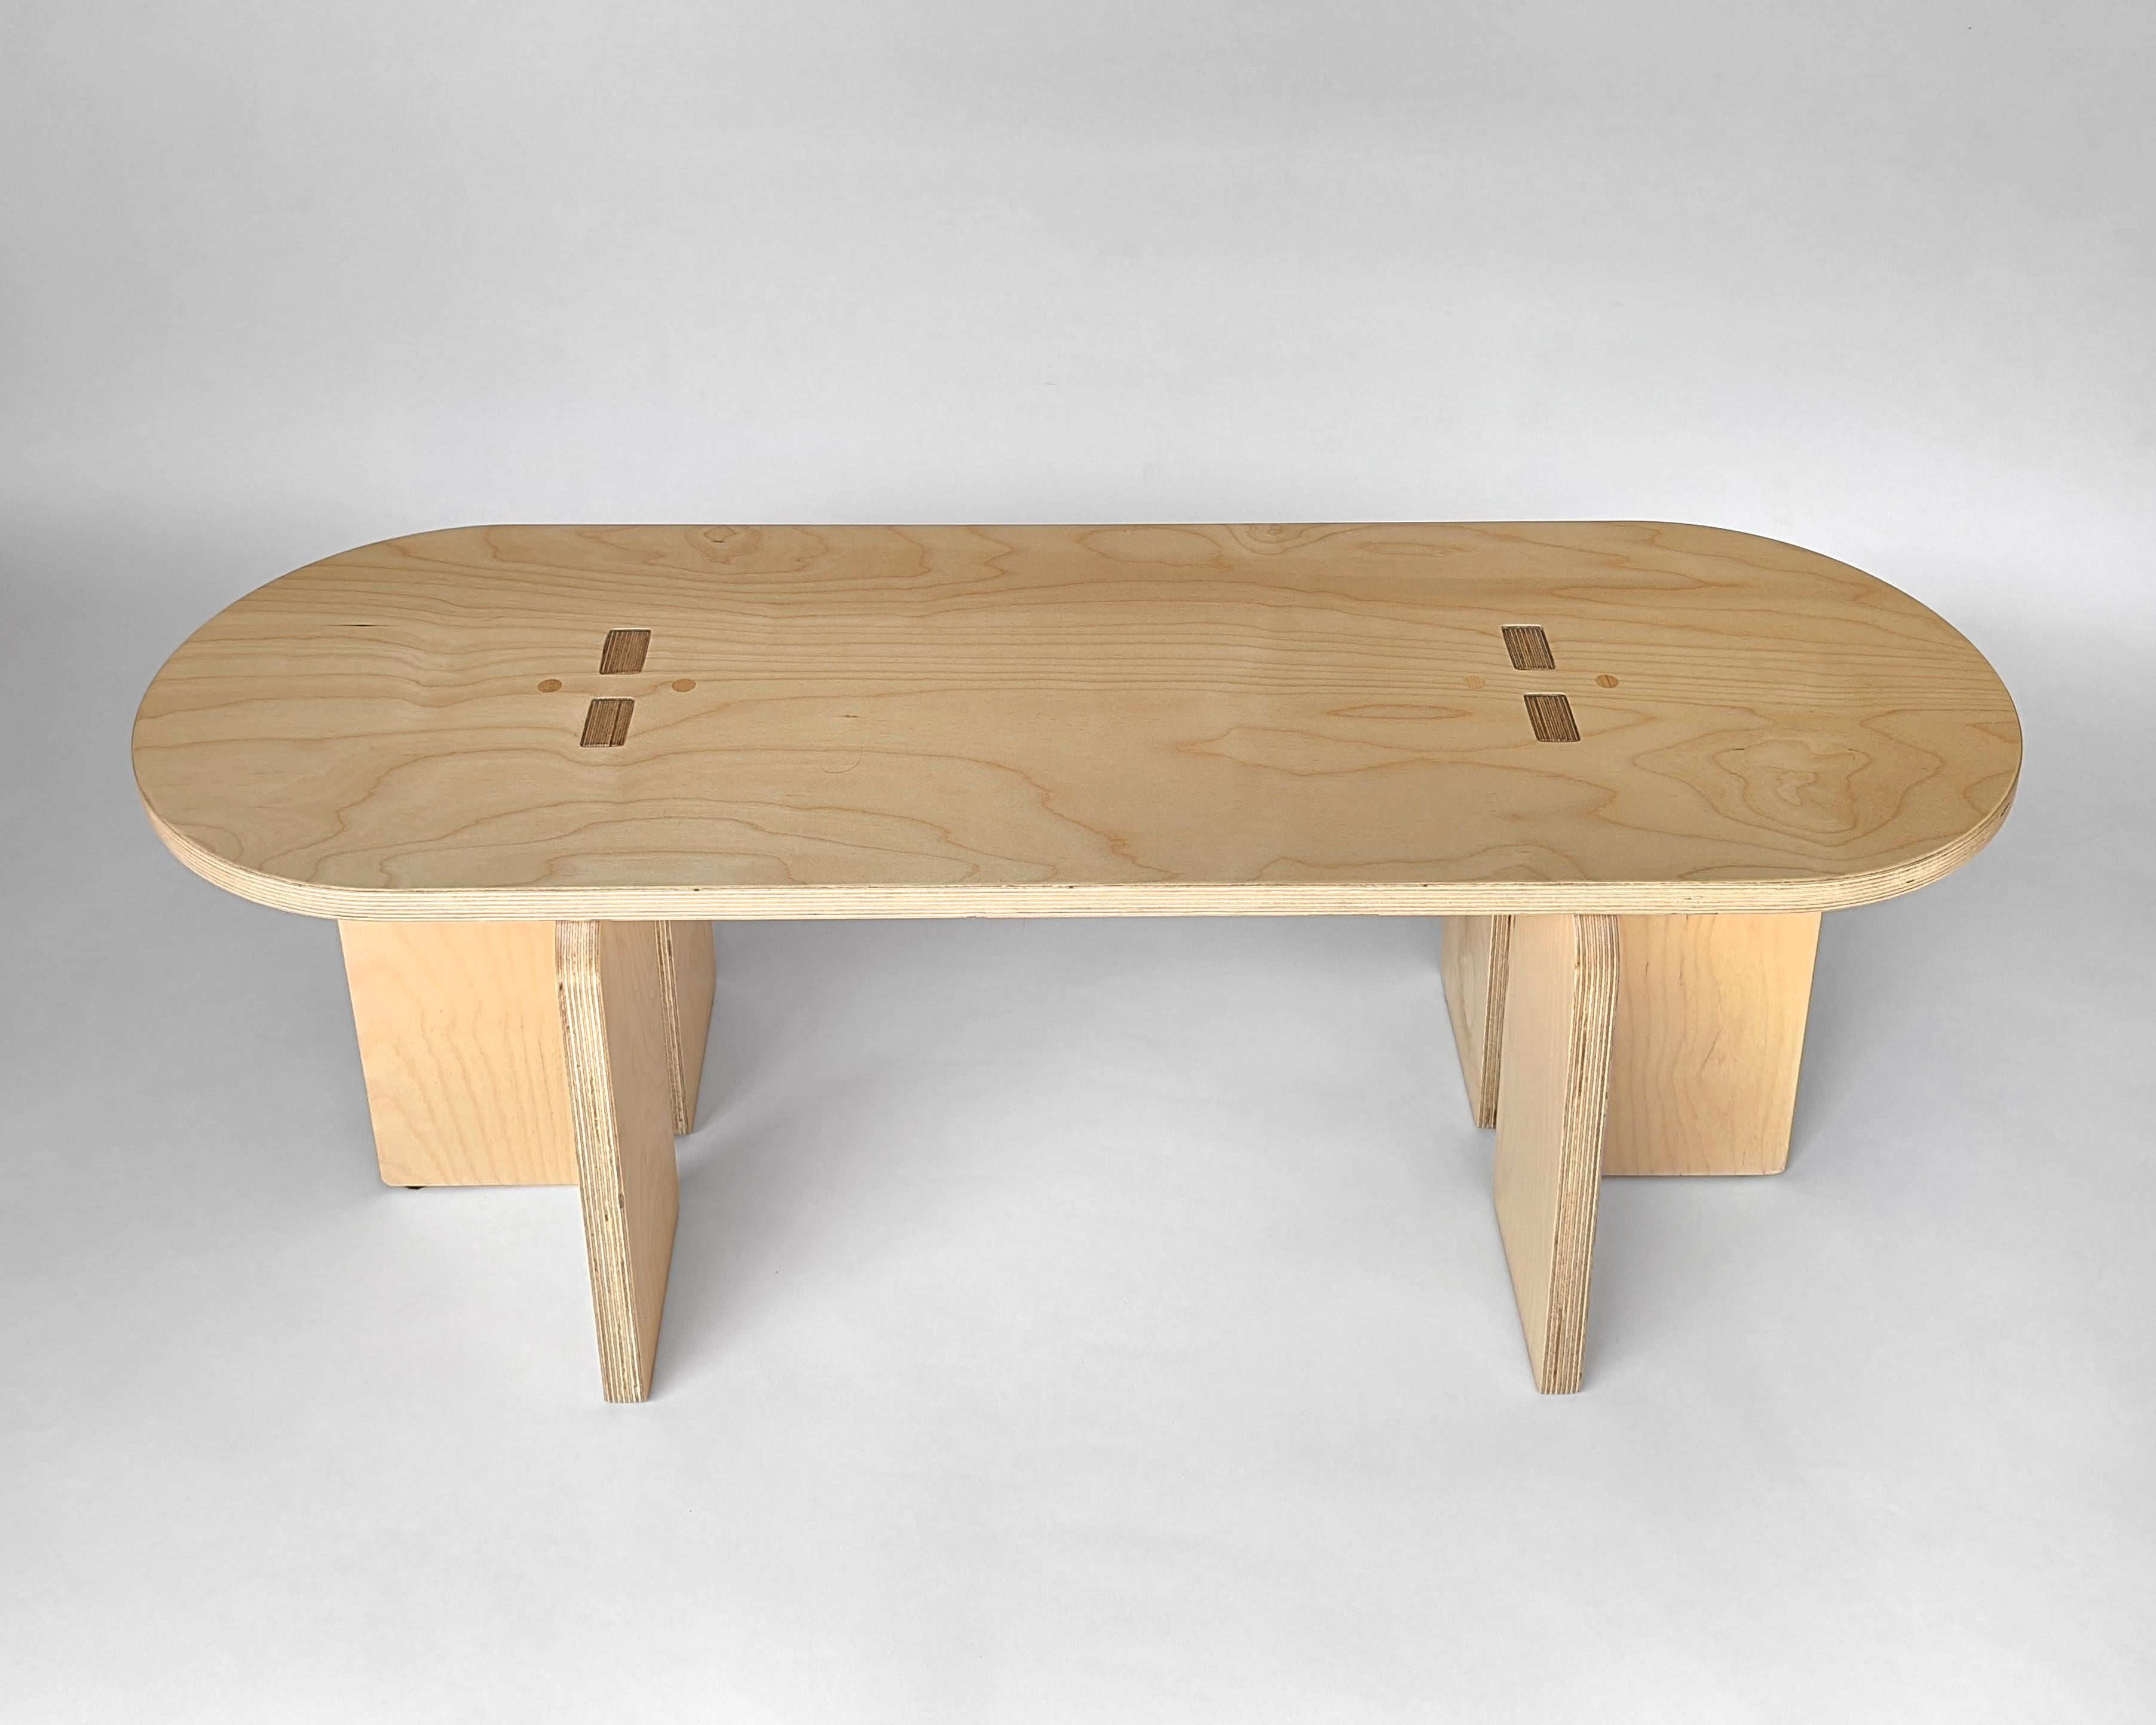 The Standard bench is made from high quality Baltic birch plywood. It has a slightly warm, clear satin finish on the light natural wood that ages beautifully with time. The Standard Bench has a rounded top, curved legs, with eased edges all around